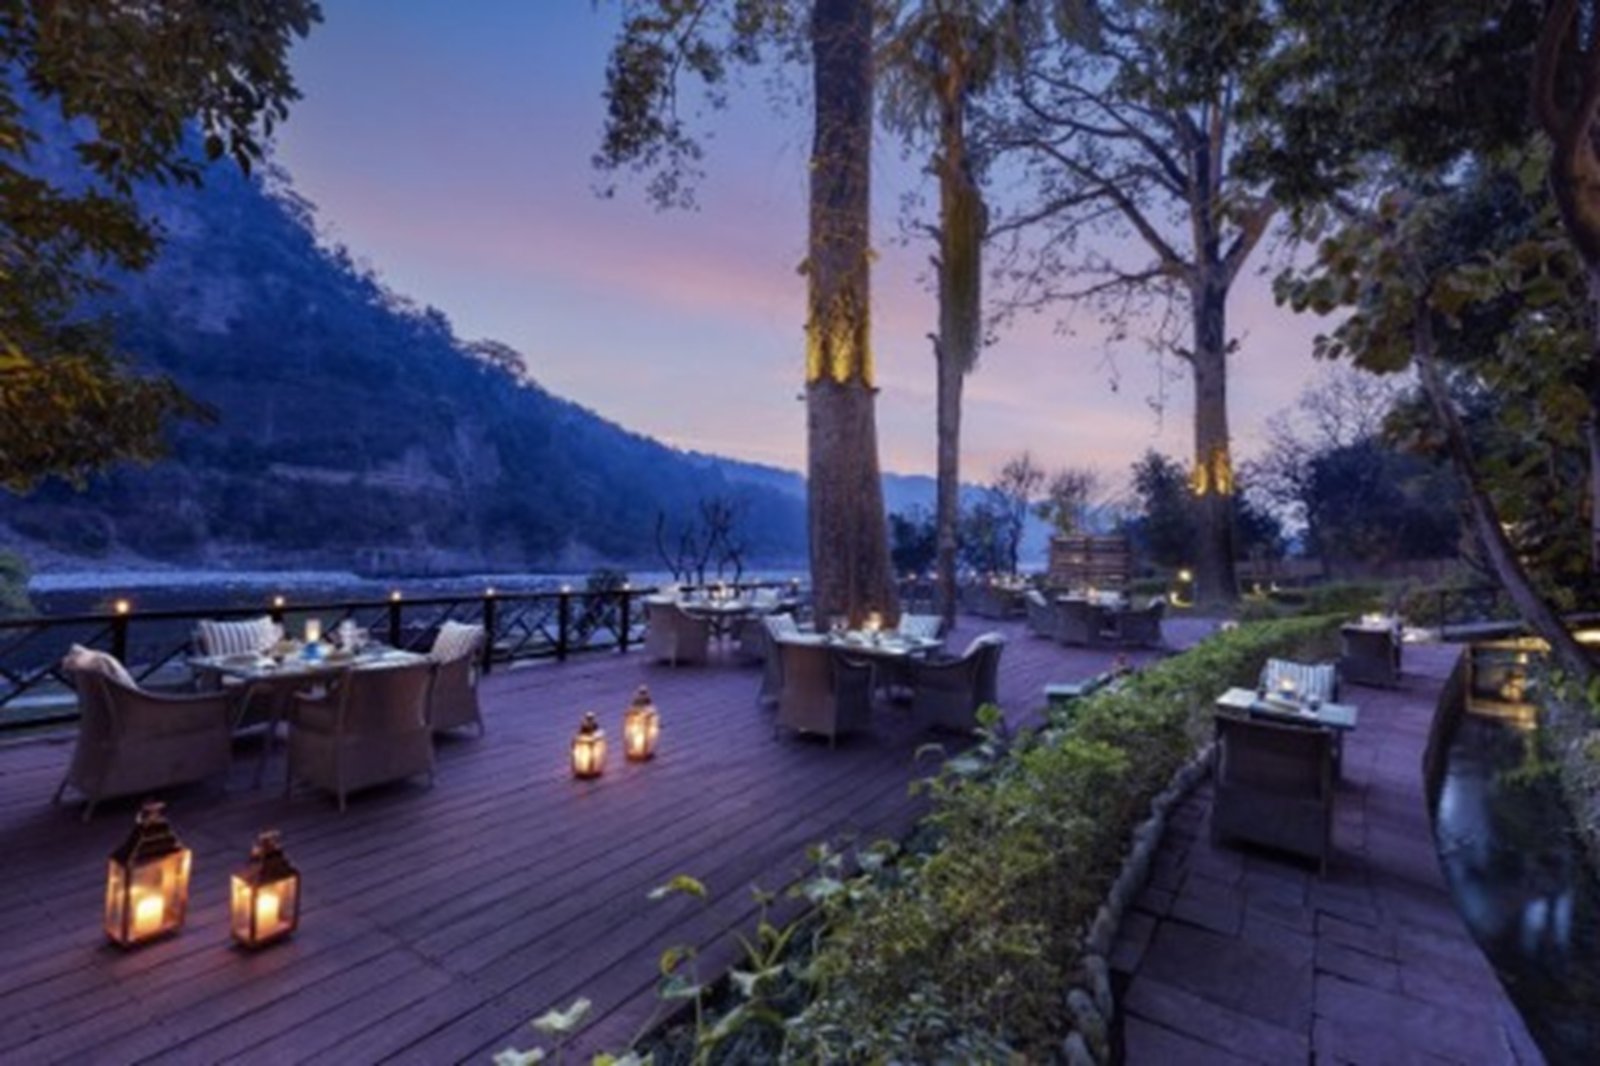 Leisure Hotels Group Unveils ‘Ragas by the River’ – The Inaugural Indian Classical Music Festival Nestled in Nature’s Lap in Uttarakhand”